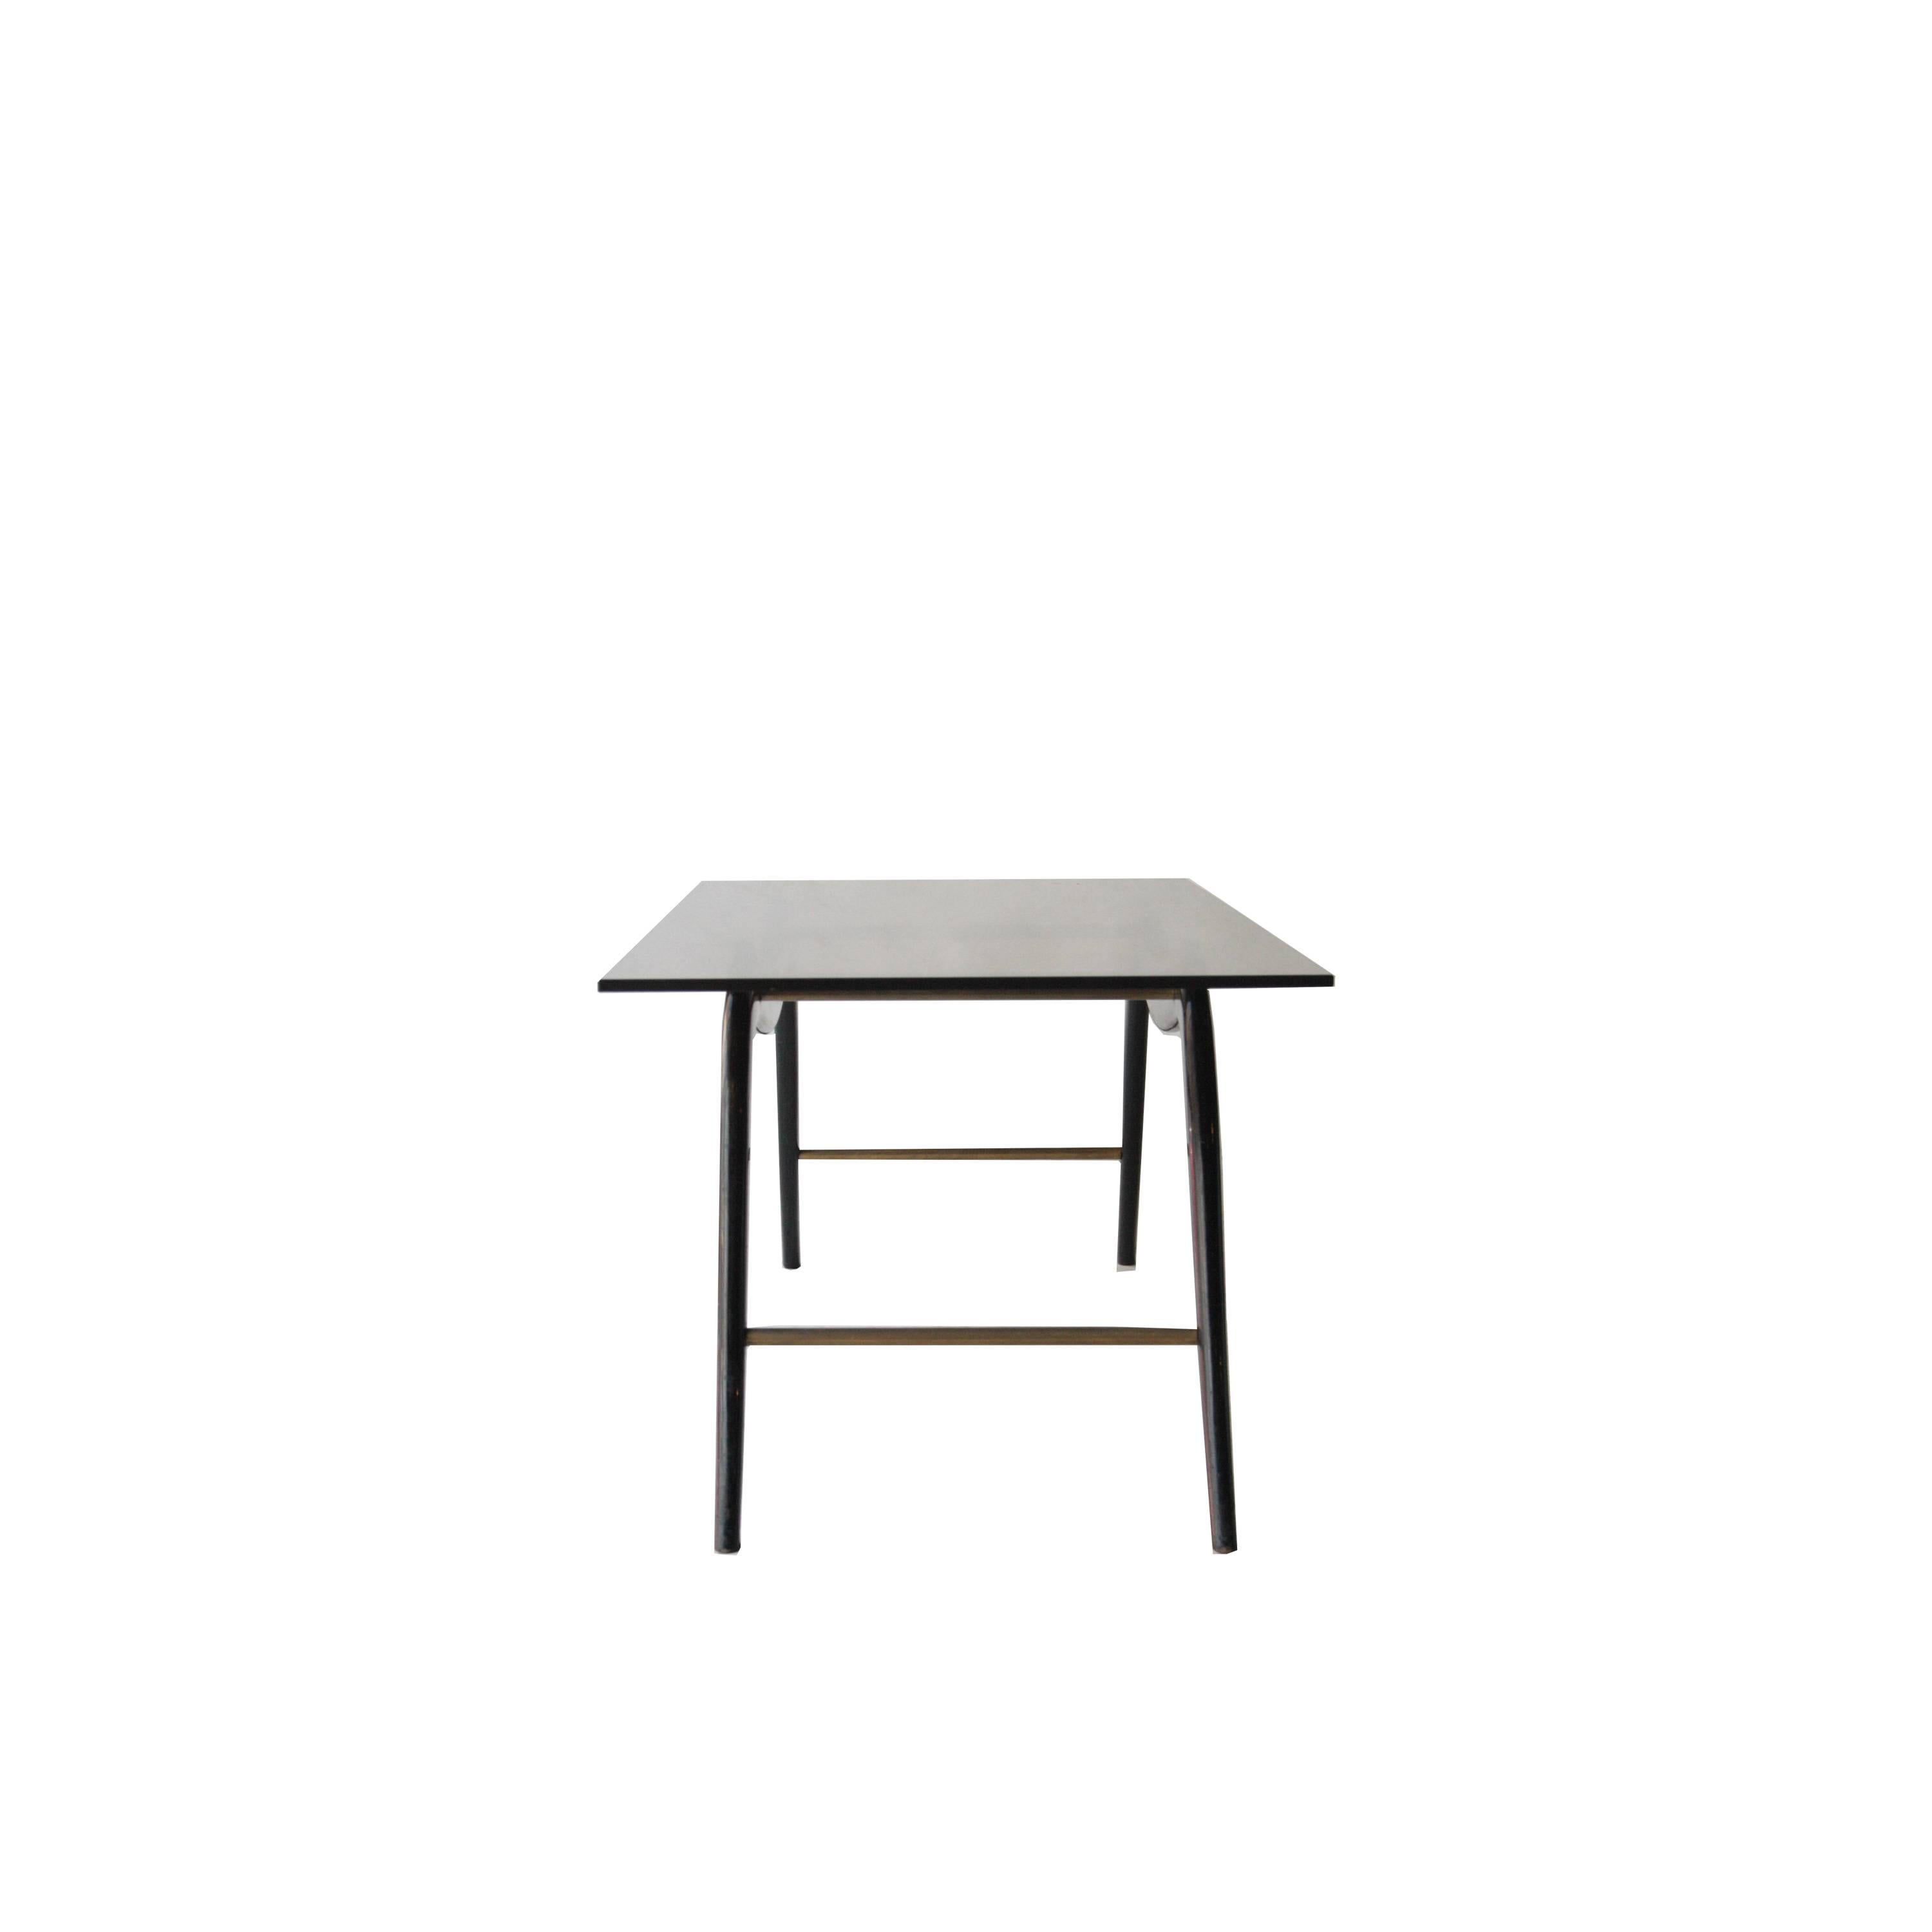 Ico Parisi Midcentury Rectangular Black Wood Glass Italian Side Table, 1950 In Good Condition For Sale In Madrid, ES